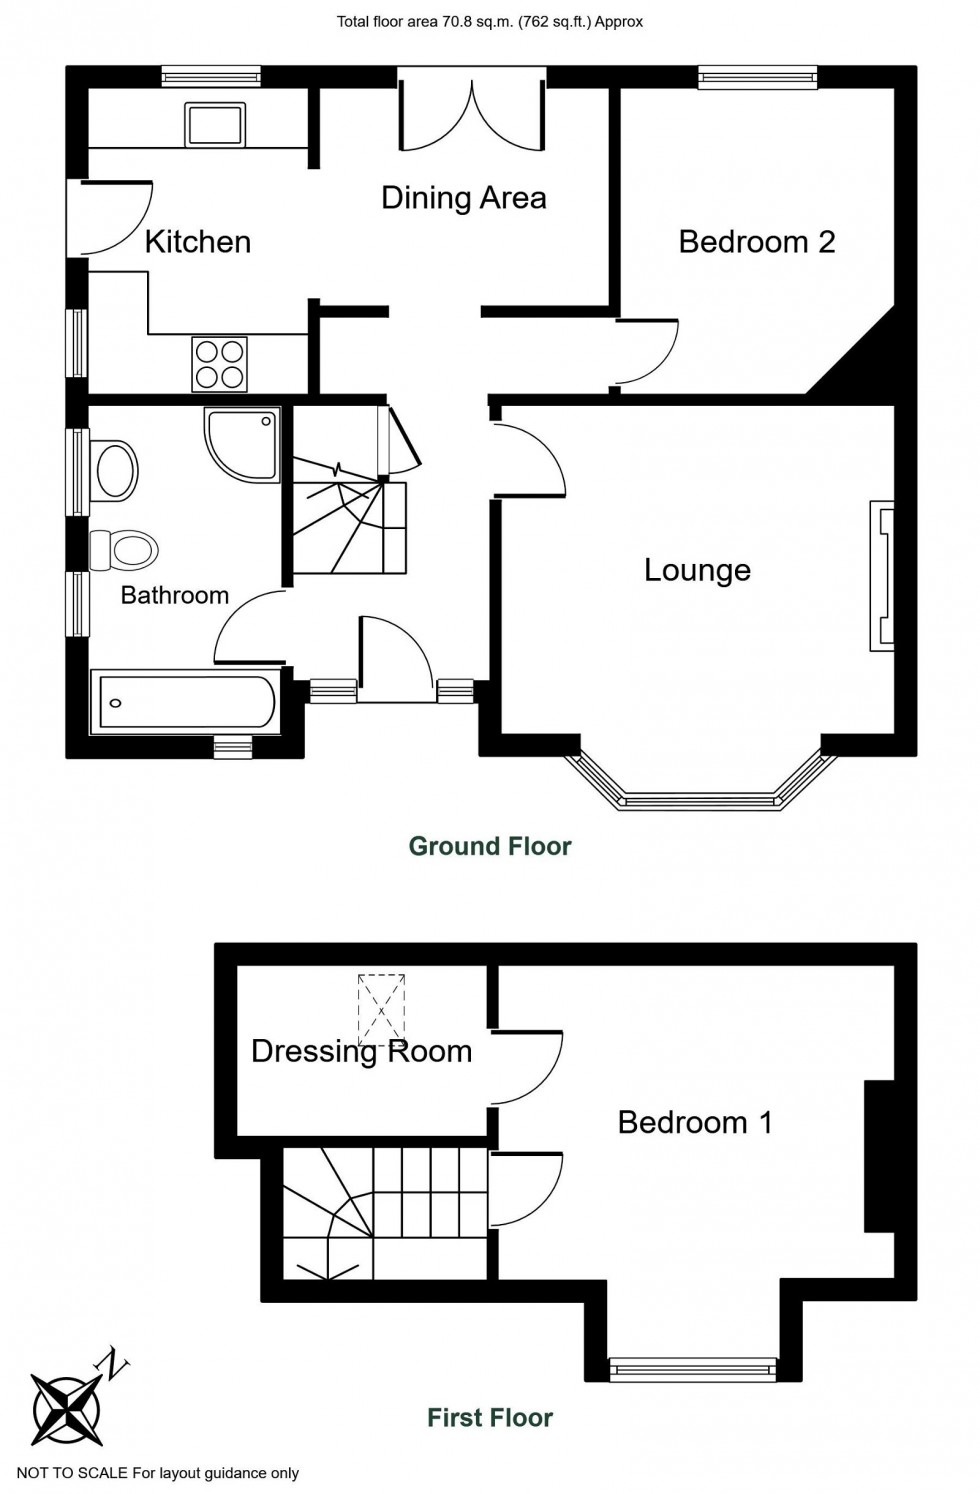 Floorplan for Wighill, Nr Tadcaster, Church Lane, LS24